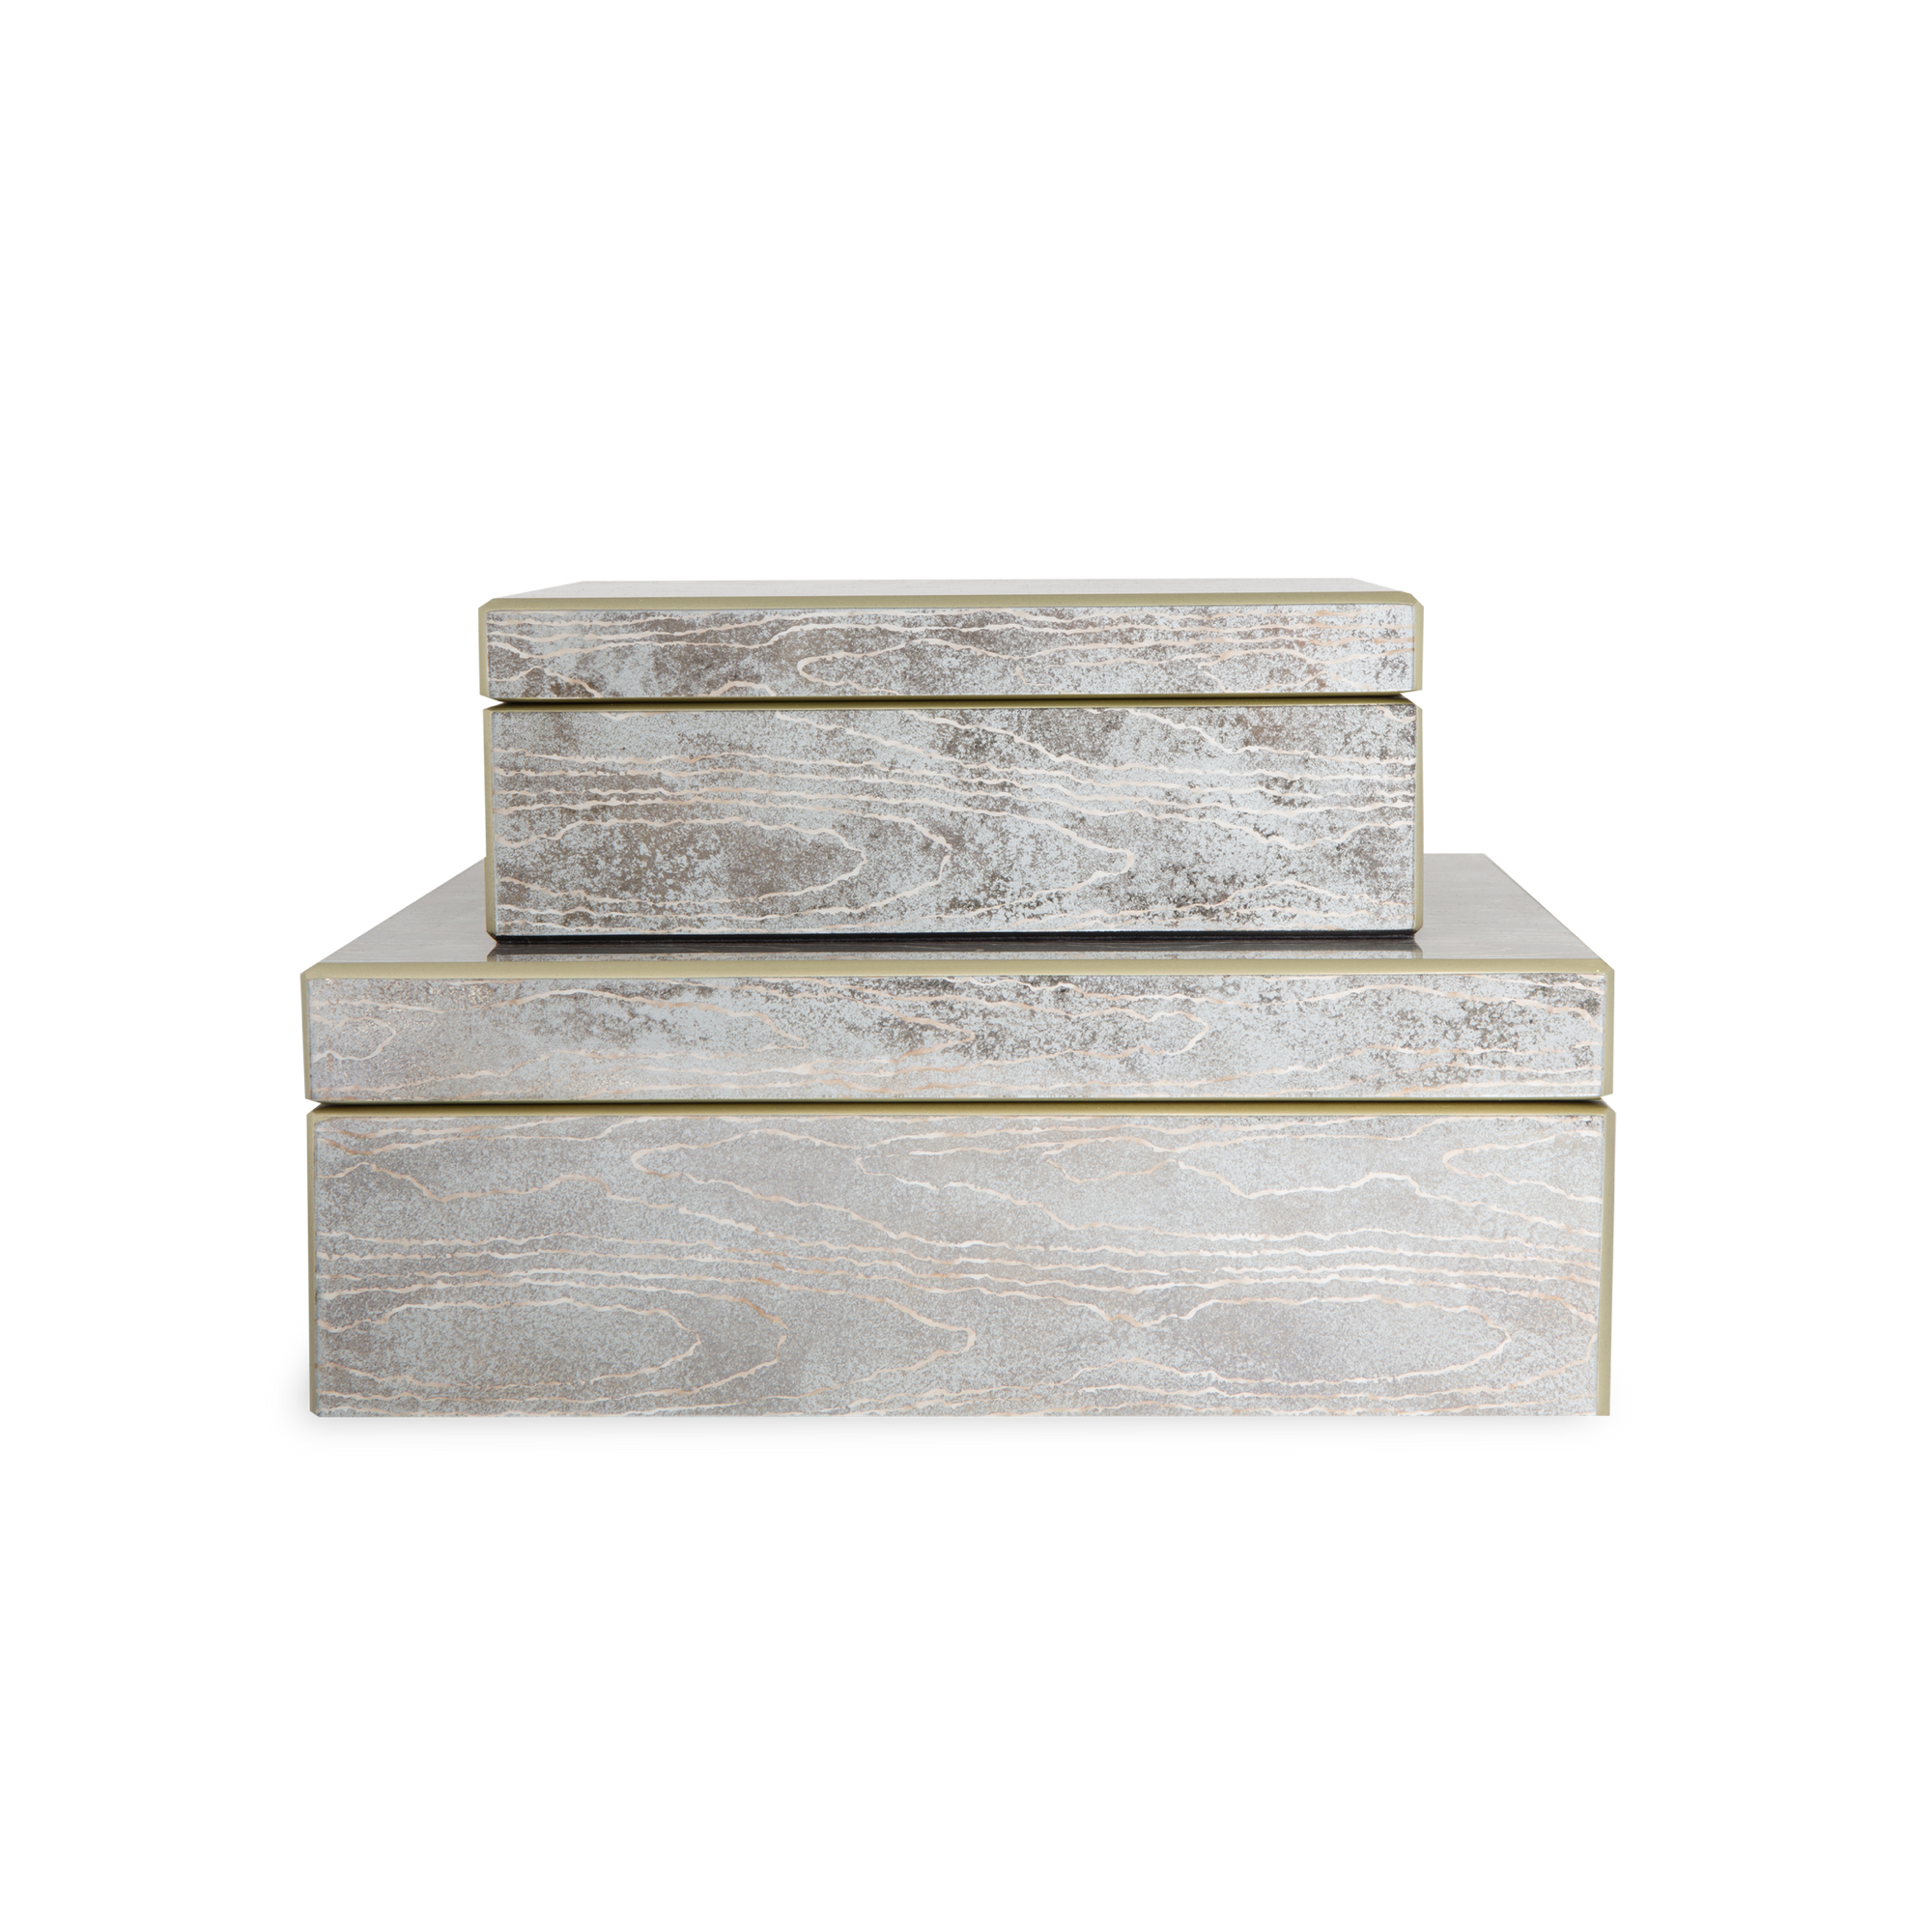 A set of two mirrored boxes with a woodgrain pattern, beveled edges, and contrasting trim.